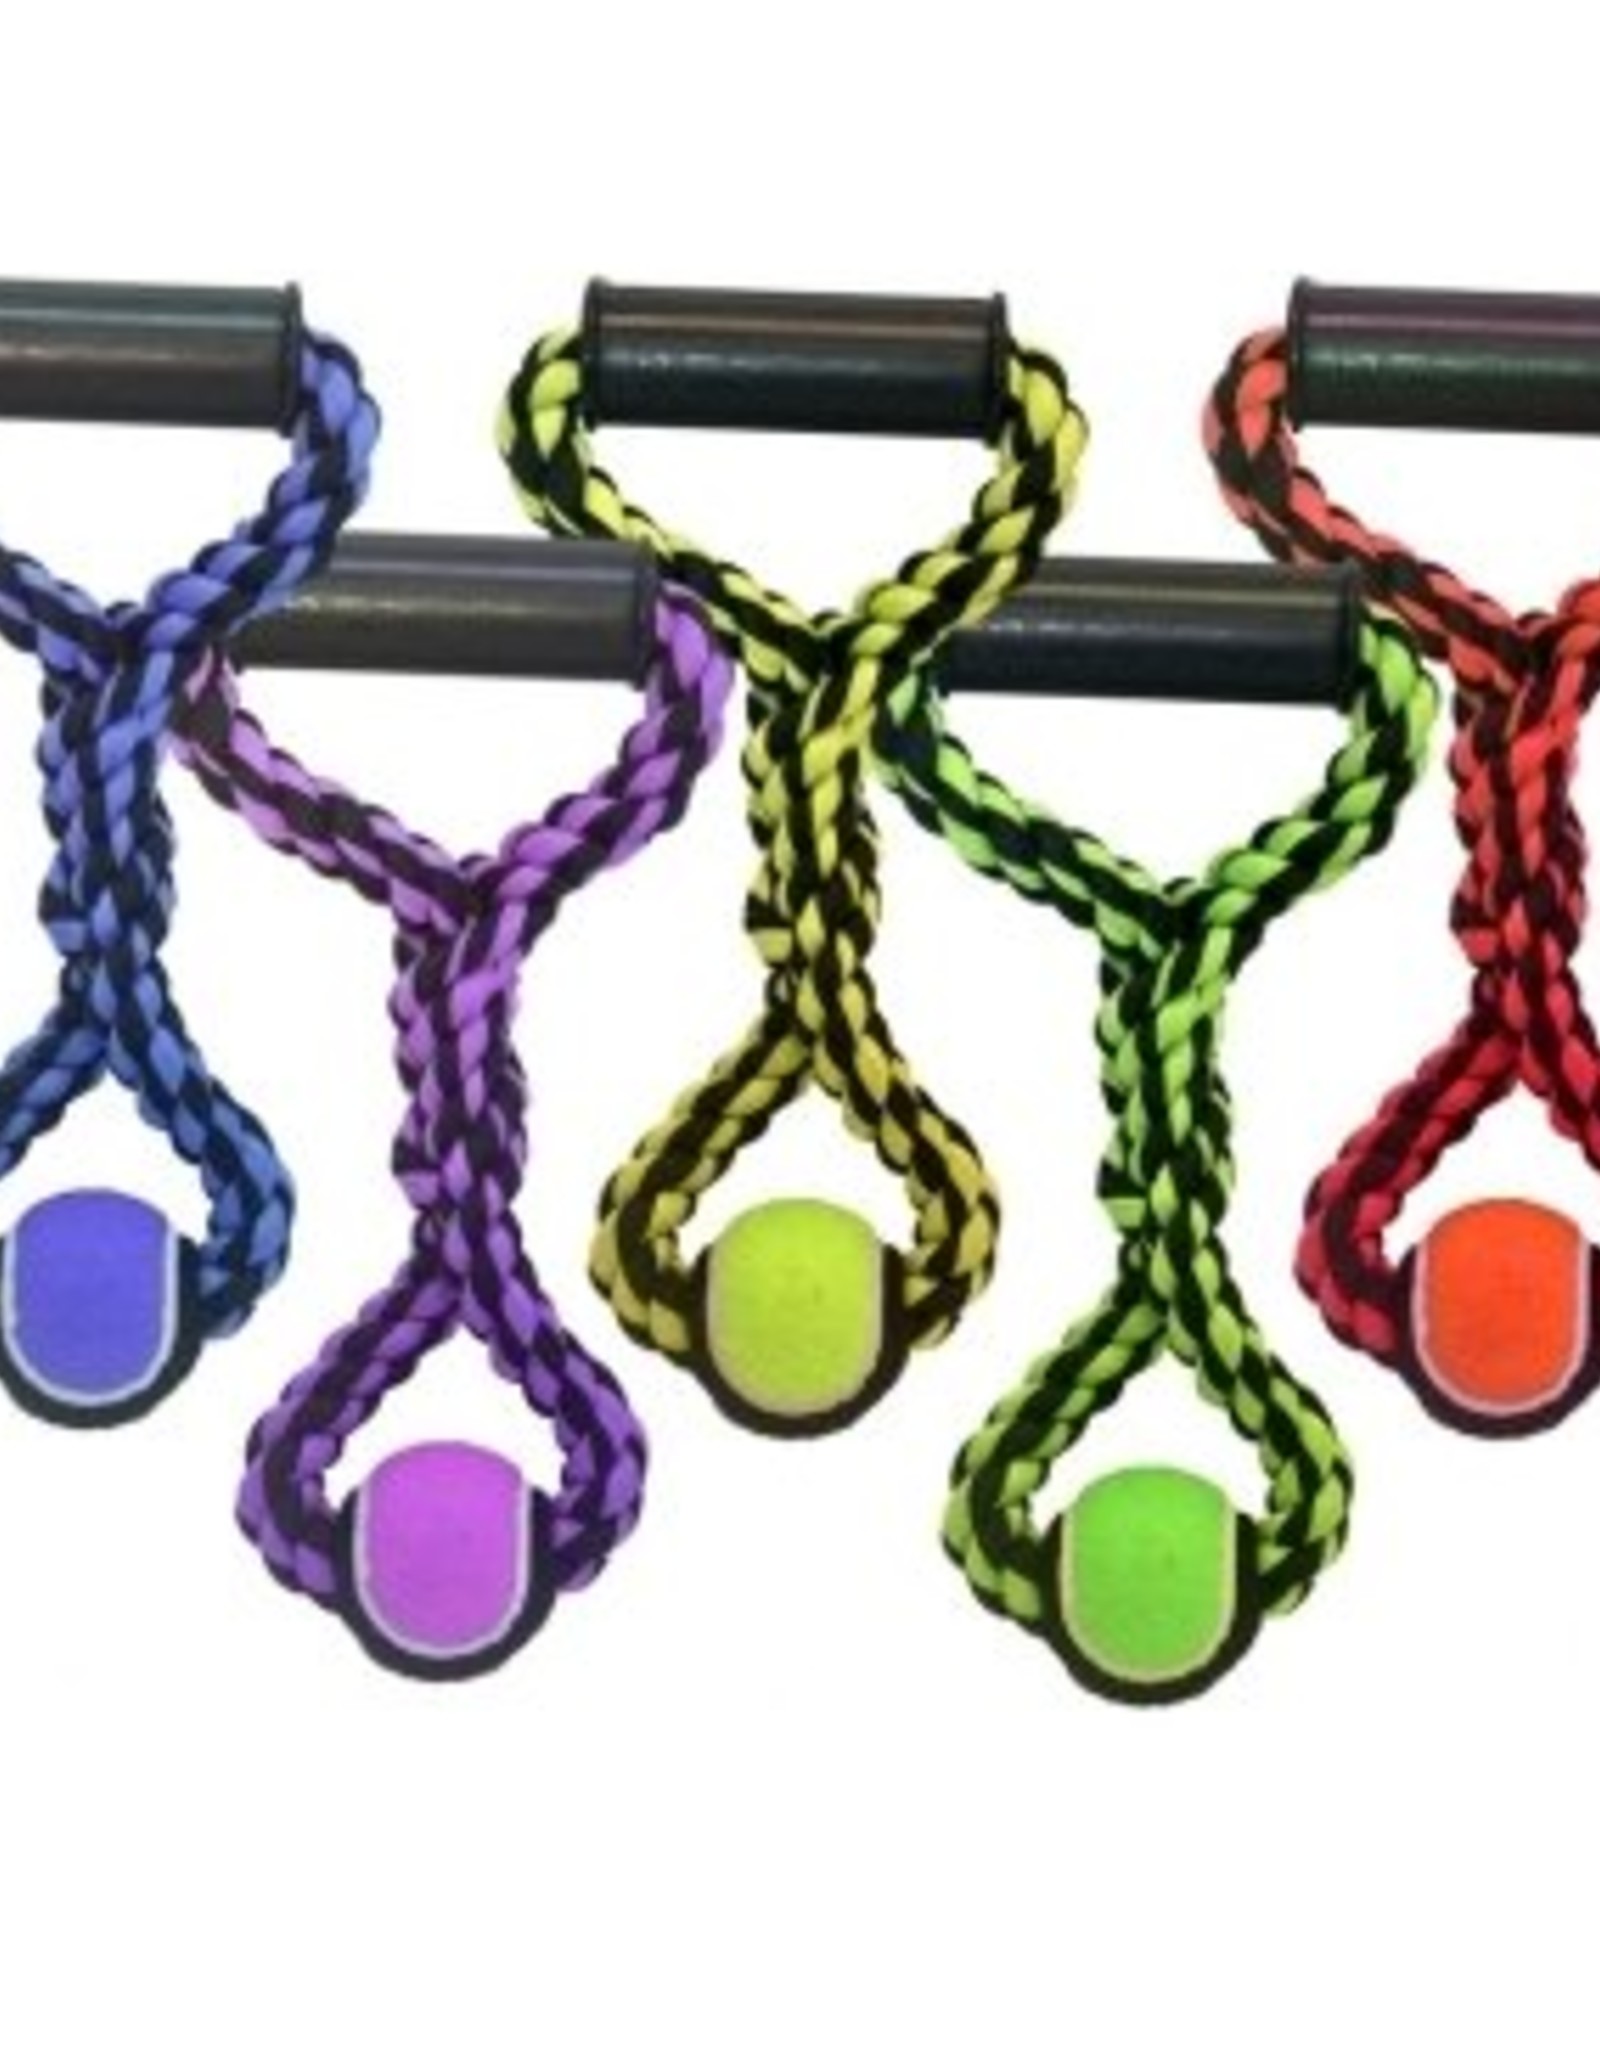 Nuts For Knots Rope Tug w/Ball - 20 inch